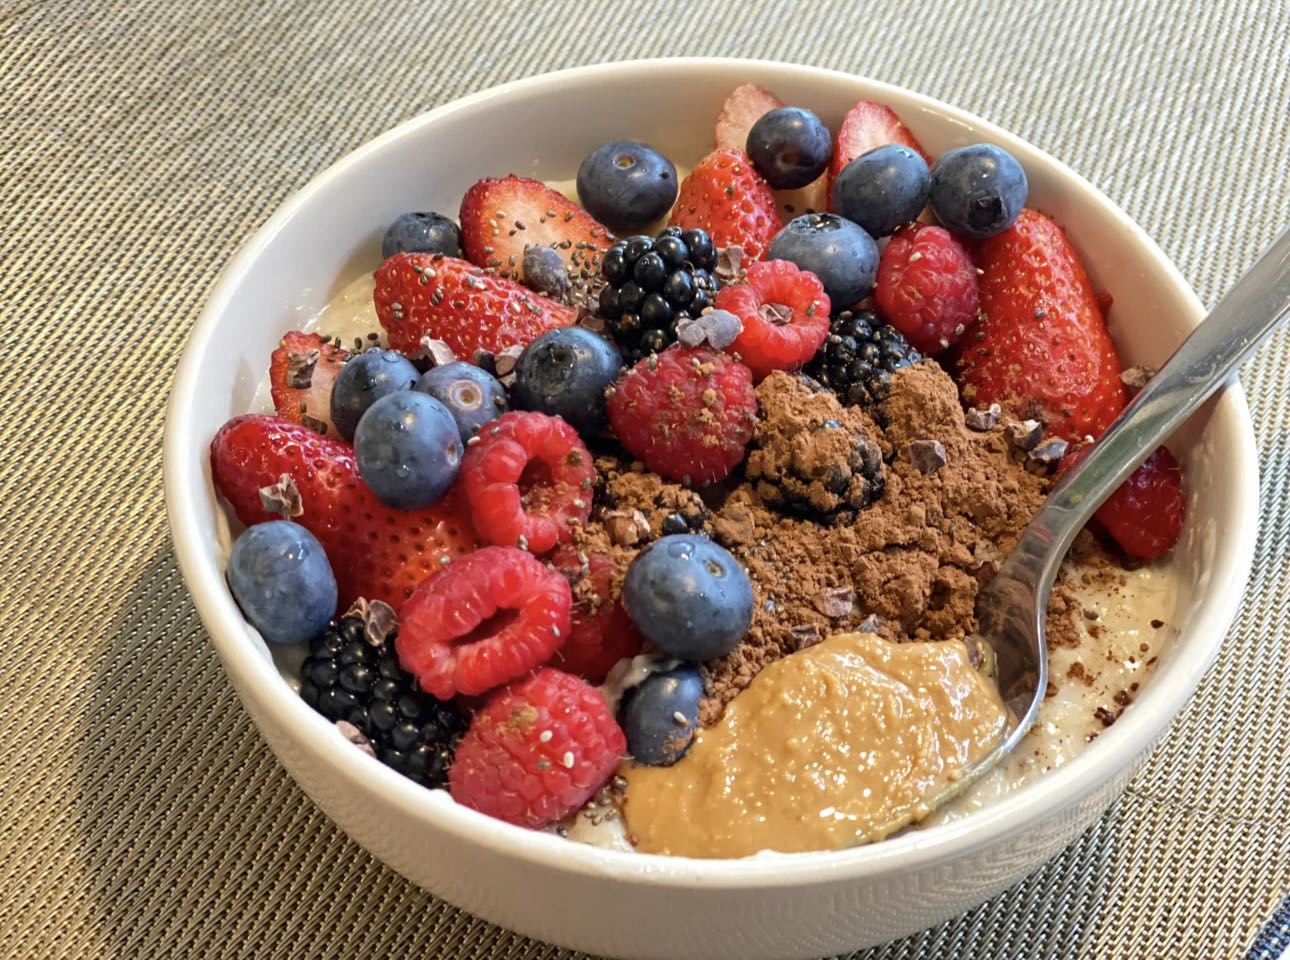 A bowl of high-protein overnight oat with chocolate protein powder, berries, blueberries, strawberries and 1 tbsp honey.